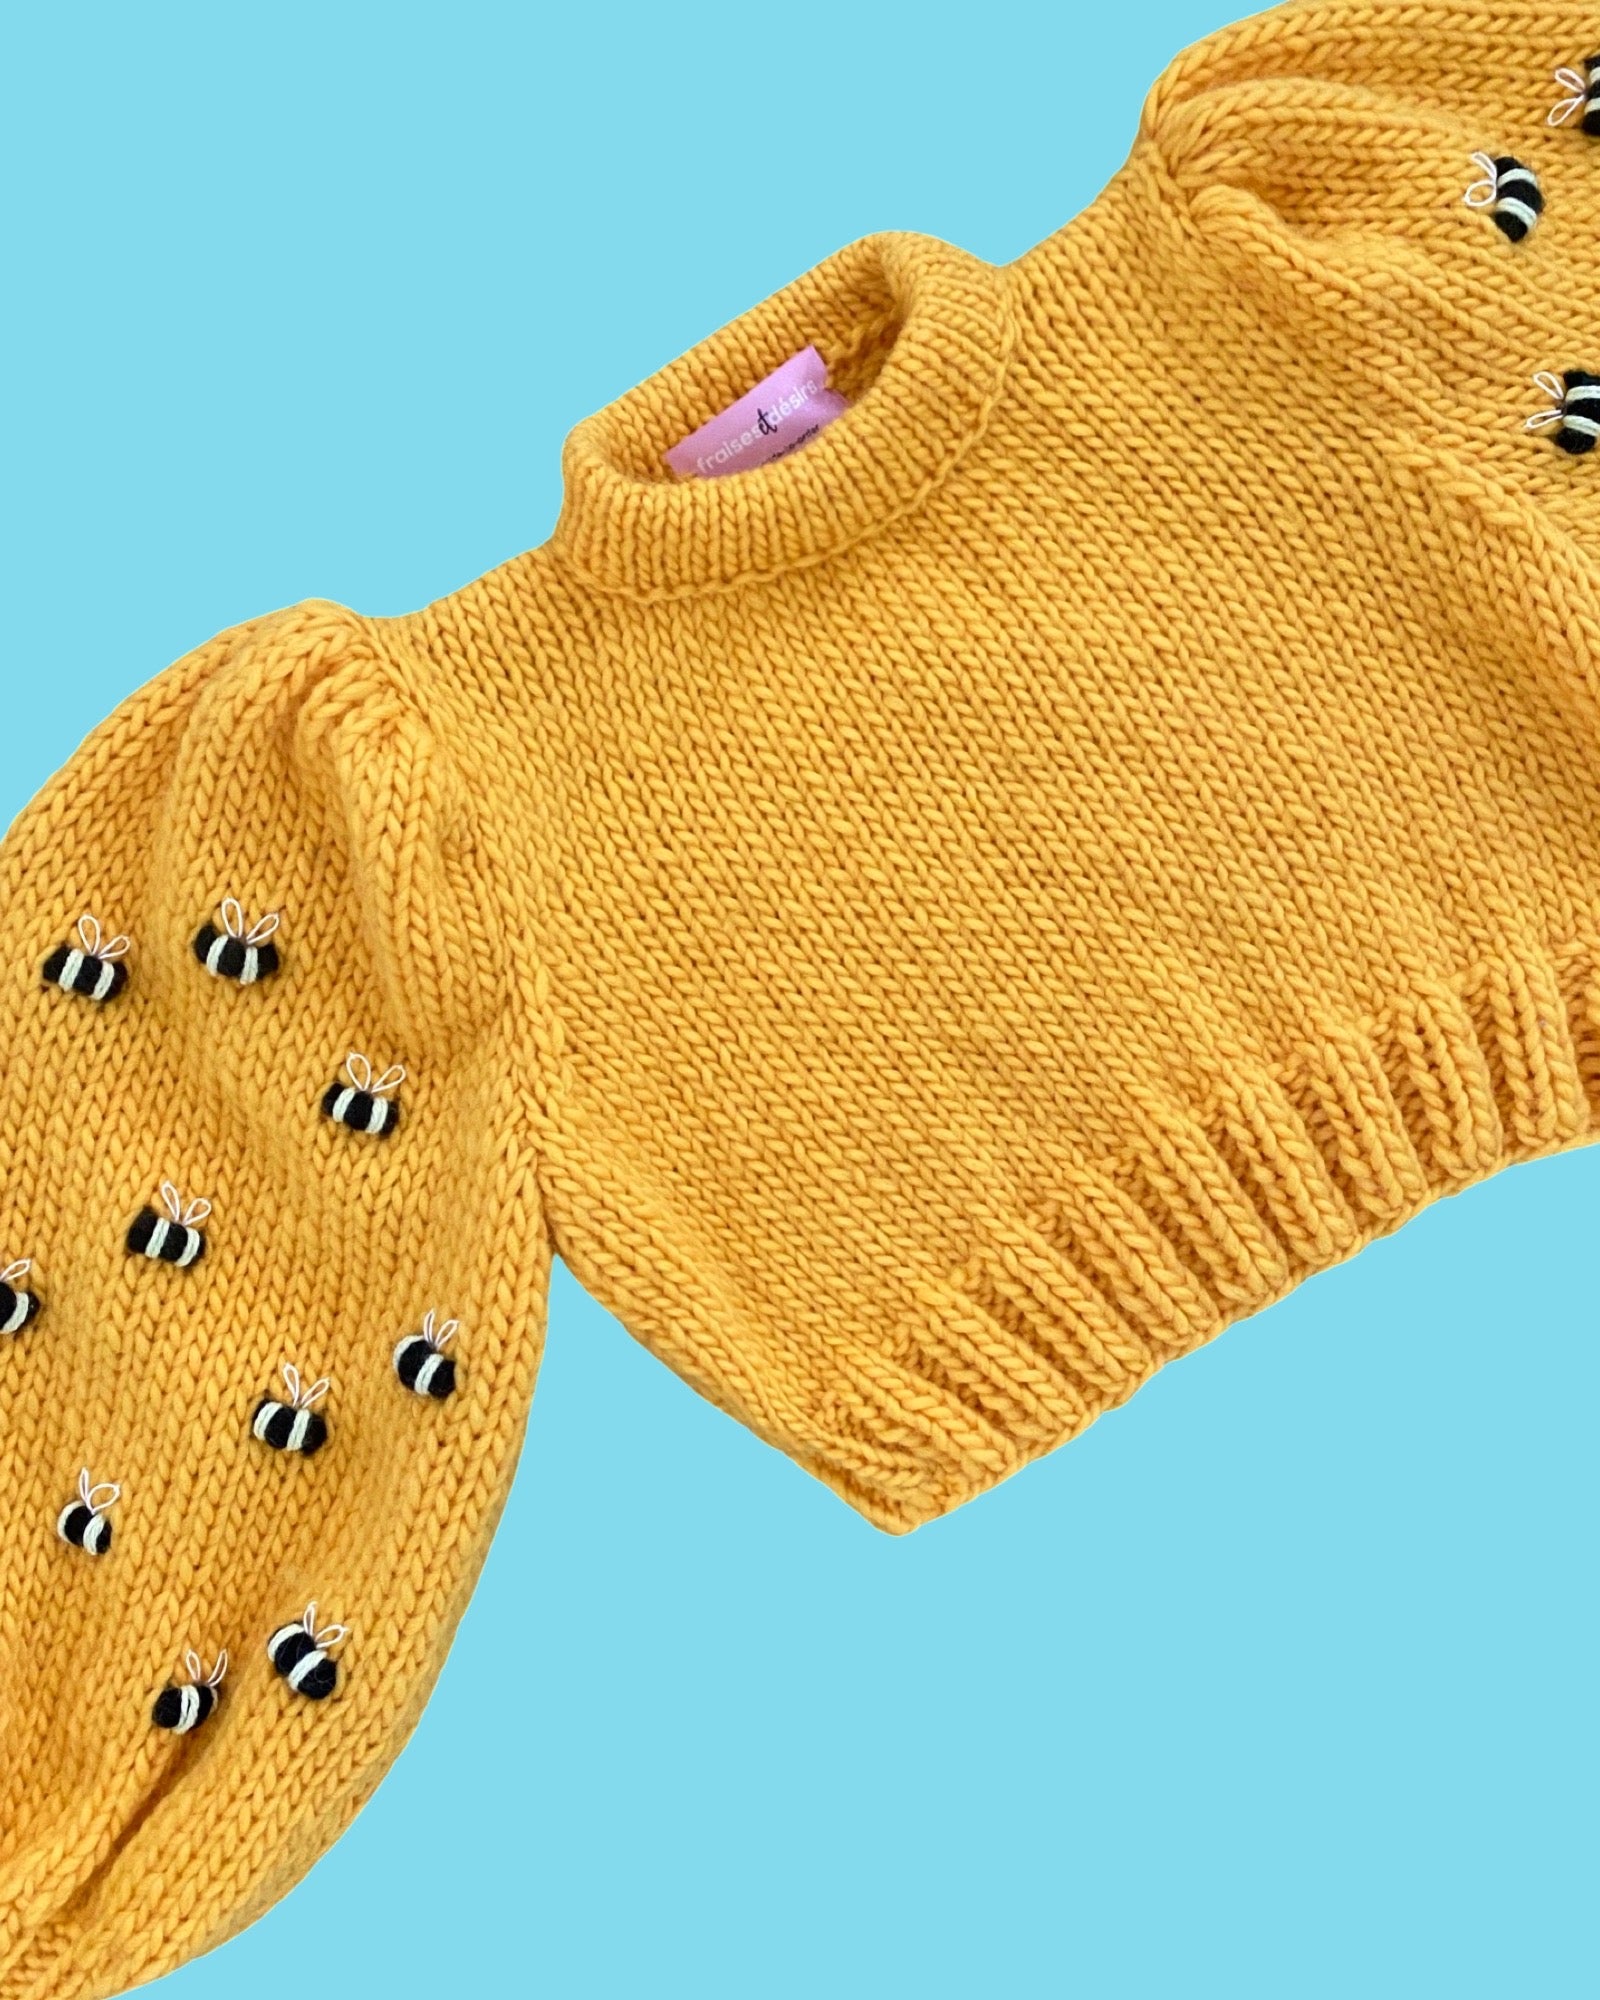 Save The Bees hand-knitted sweater